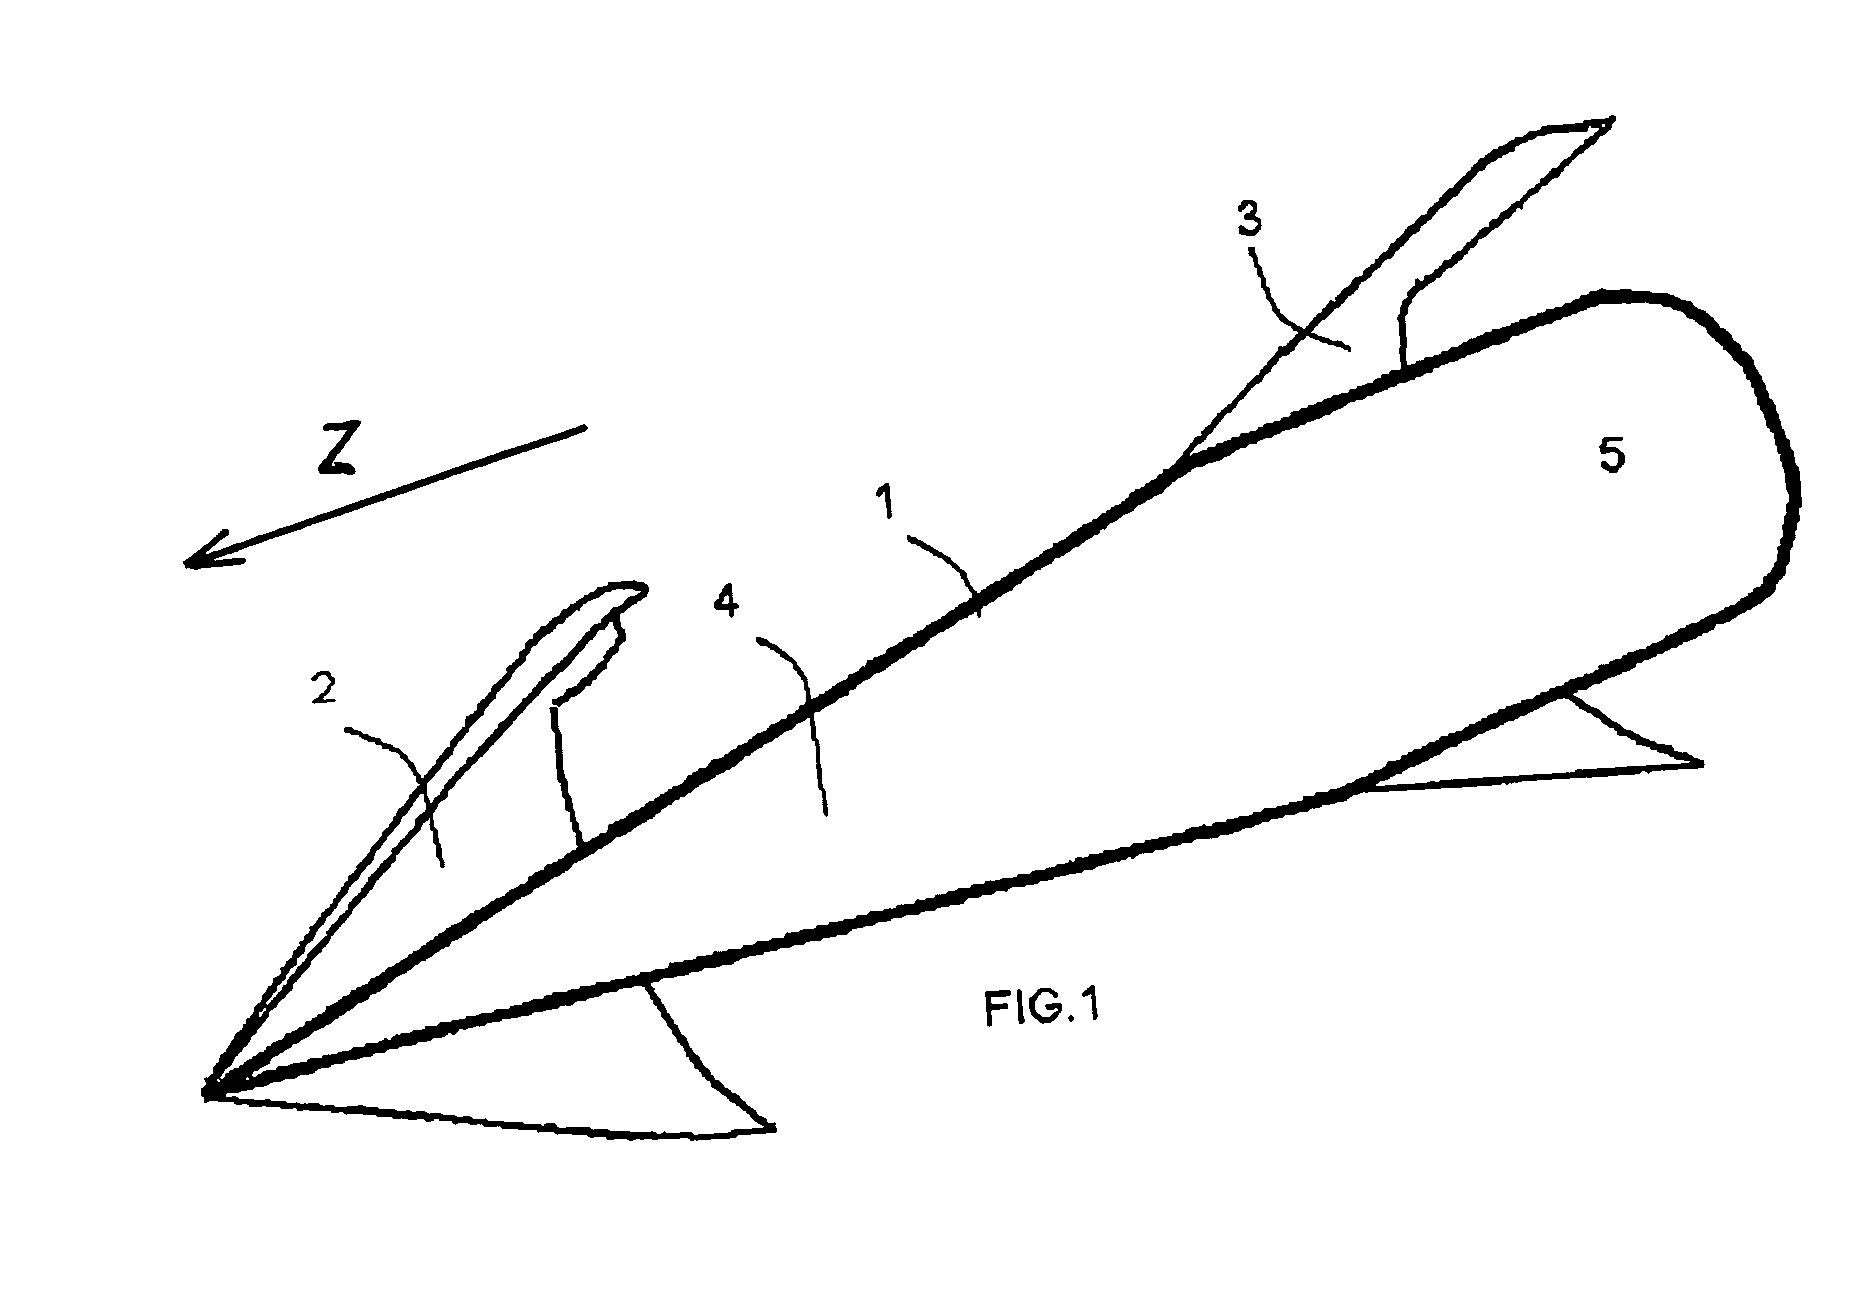 Projectile steering by plasma discharge